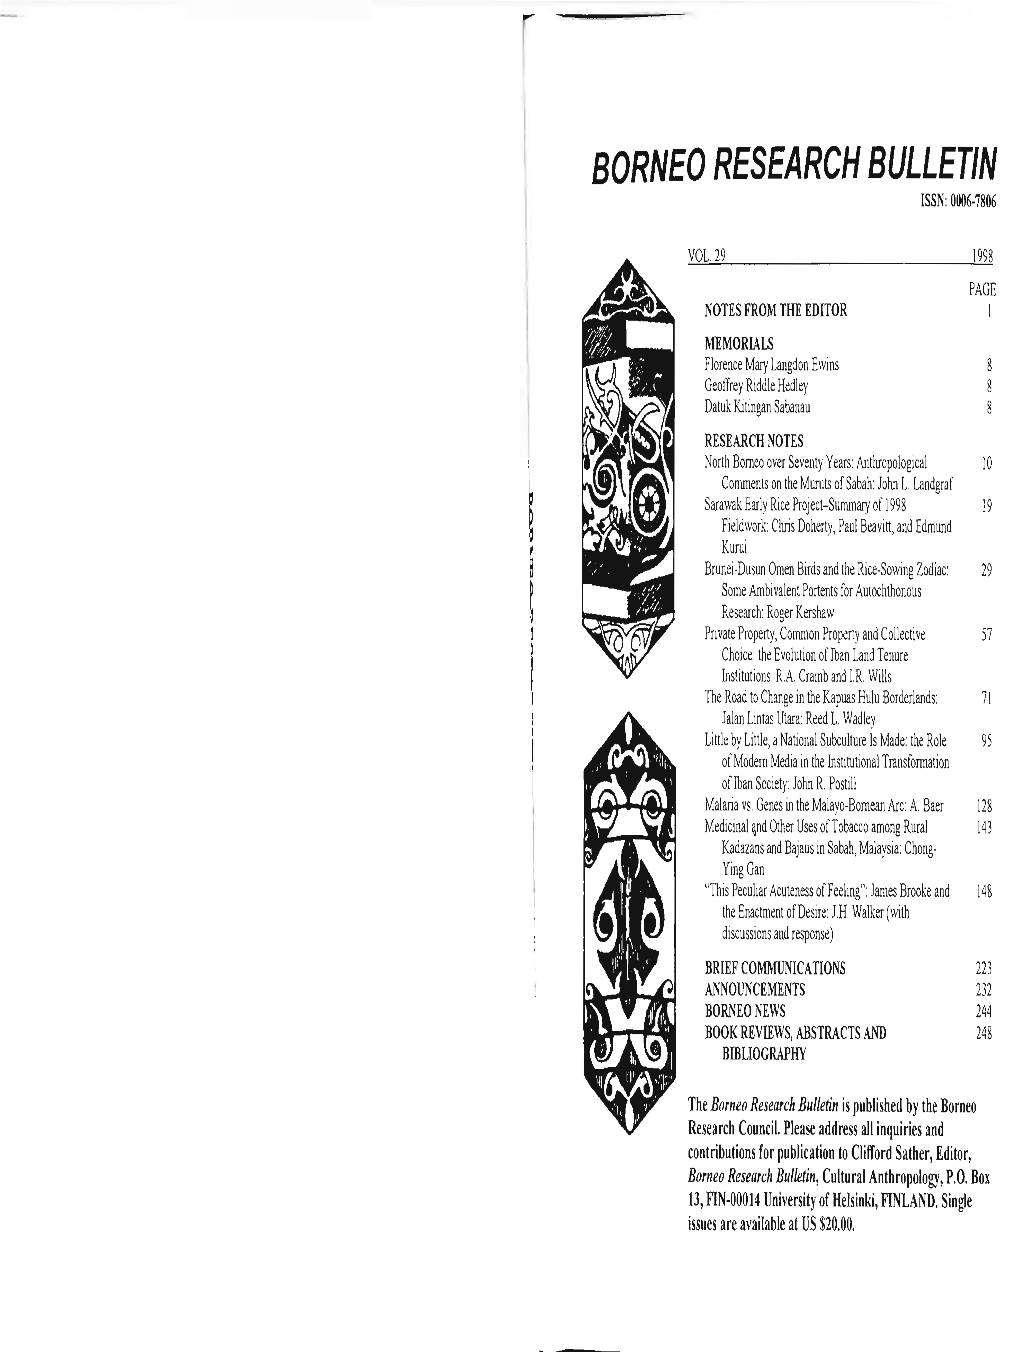 Borneo Research Bulletin Is Published by the Borneo Research Council